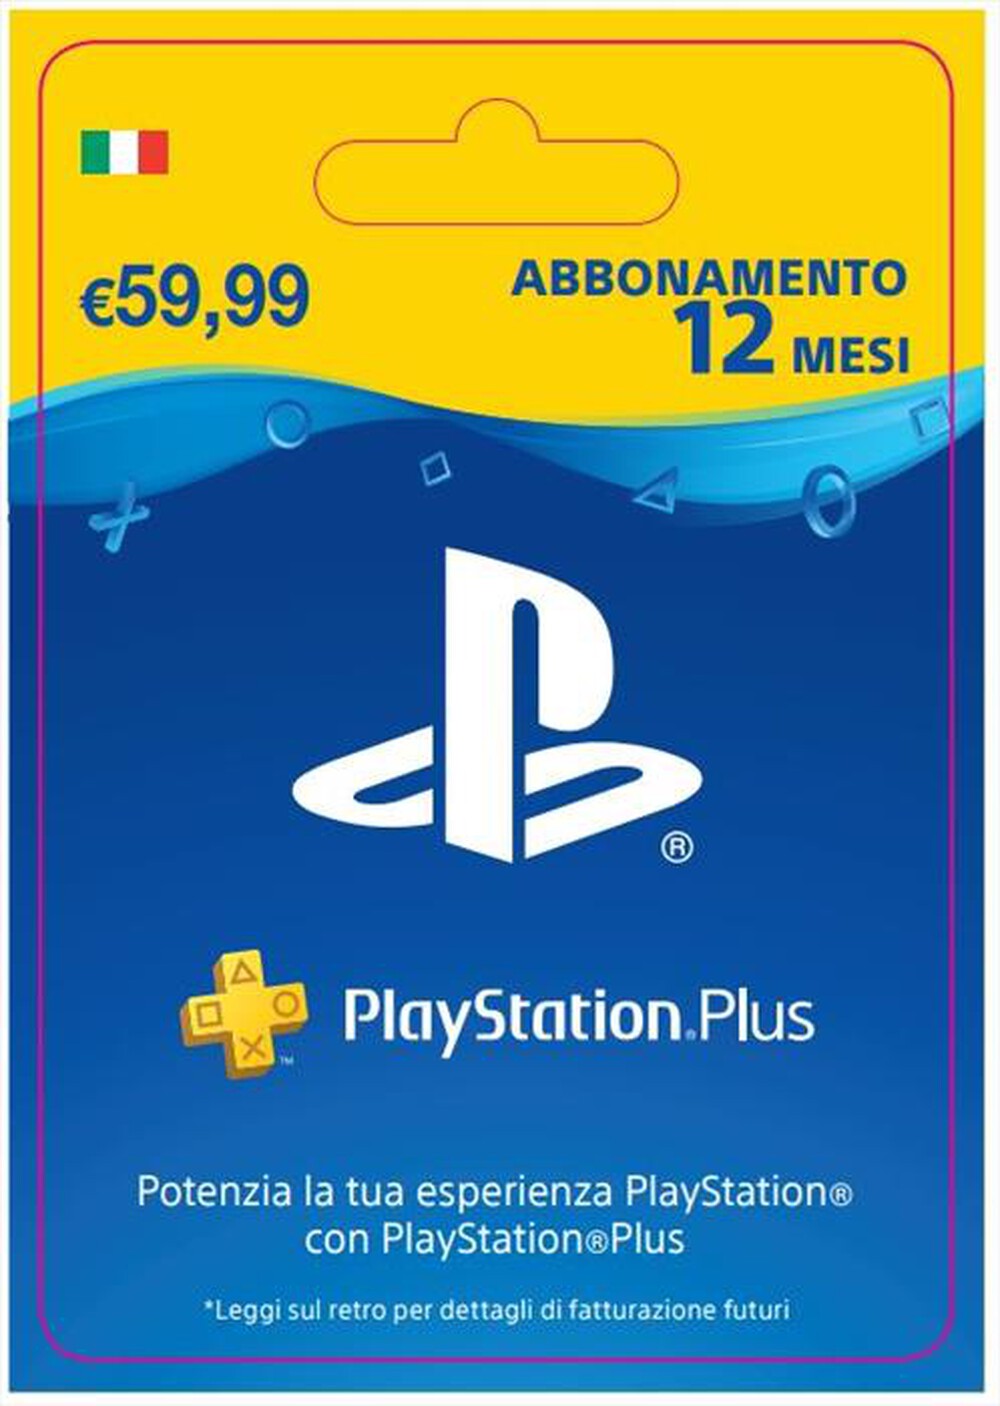 "SONY COMPUTER - PS4 PlayStation Plus Card Hang 365 Days"